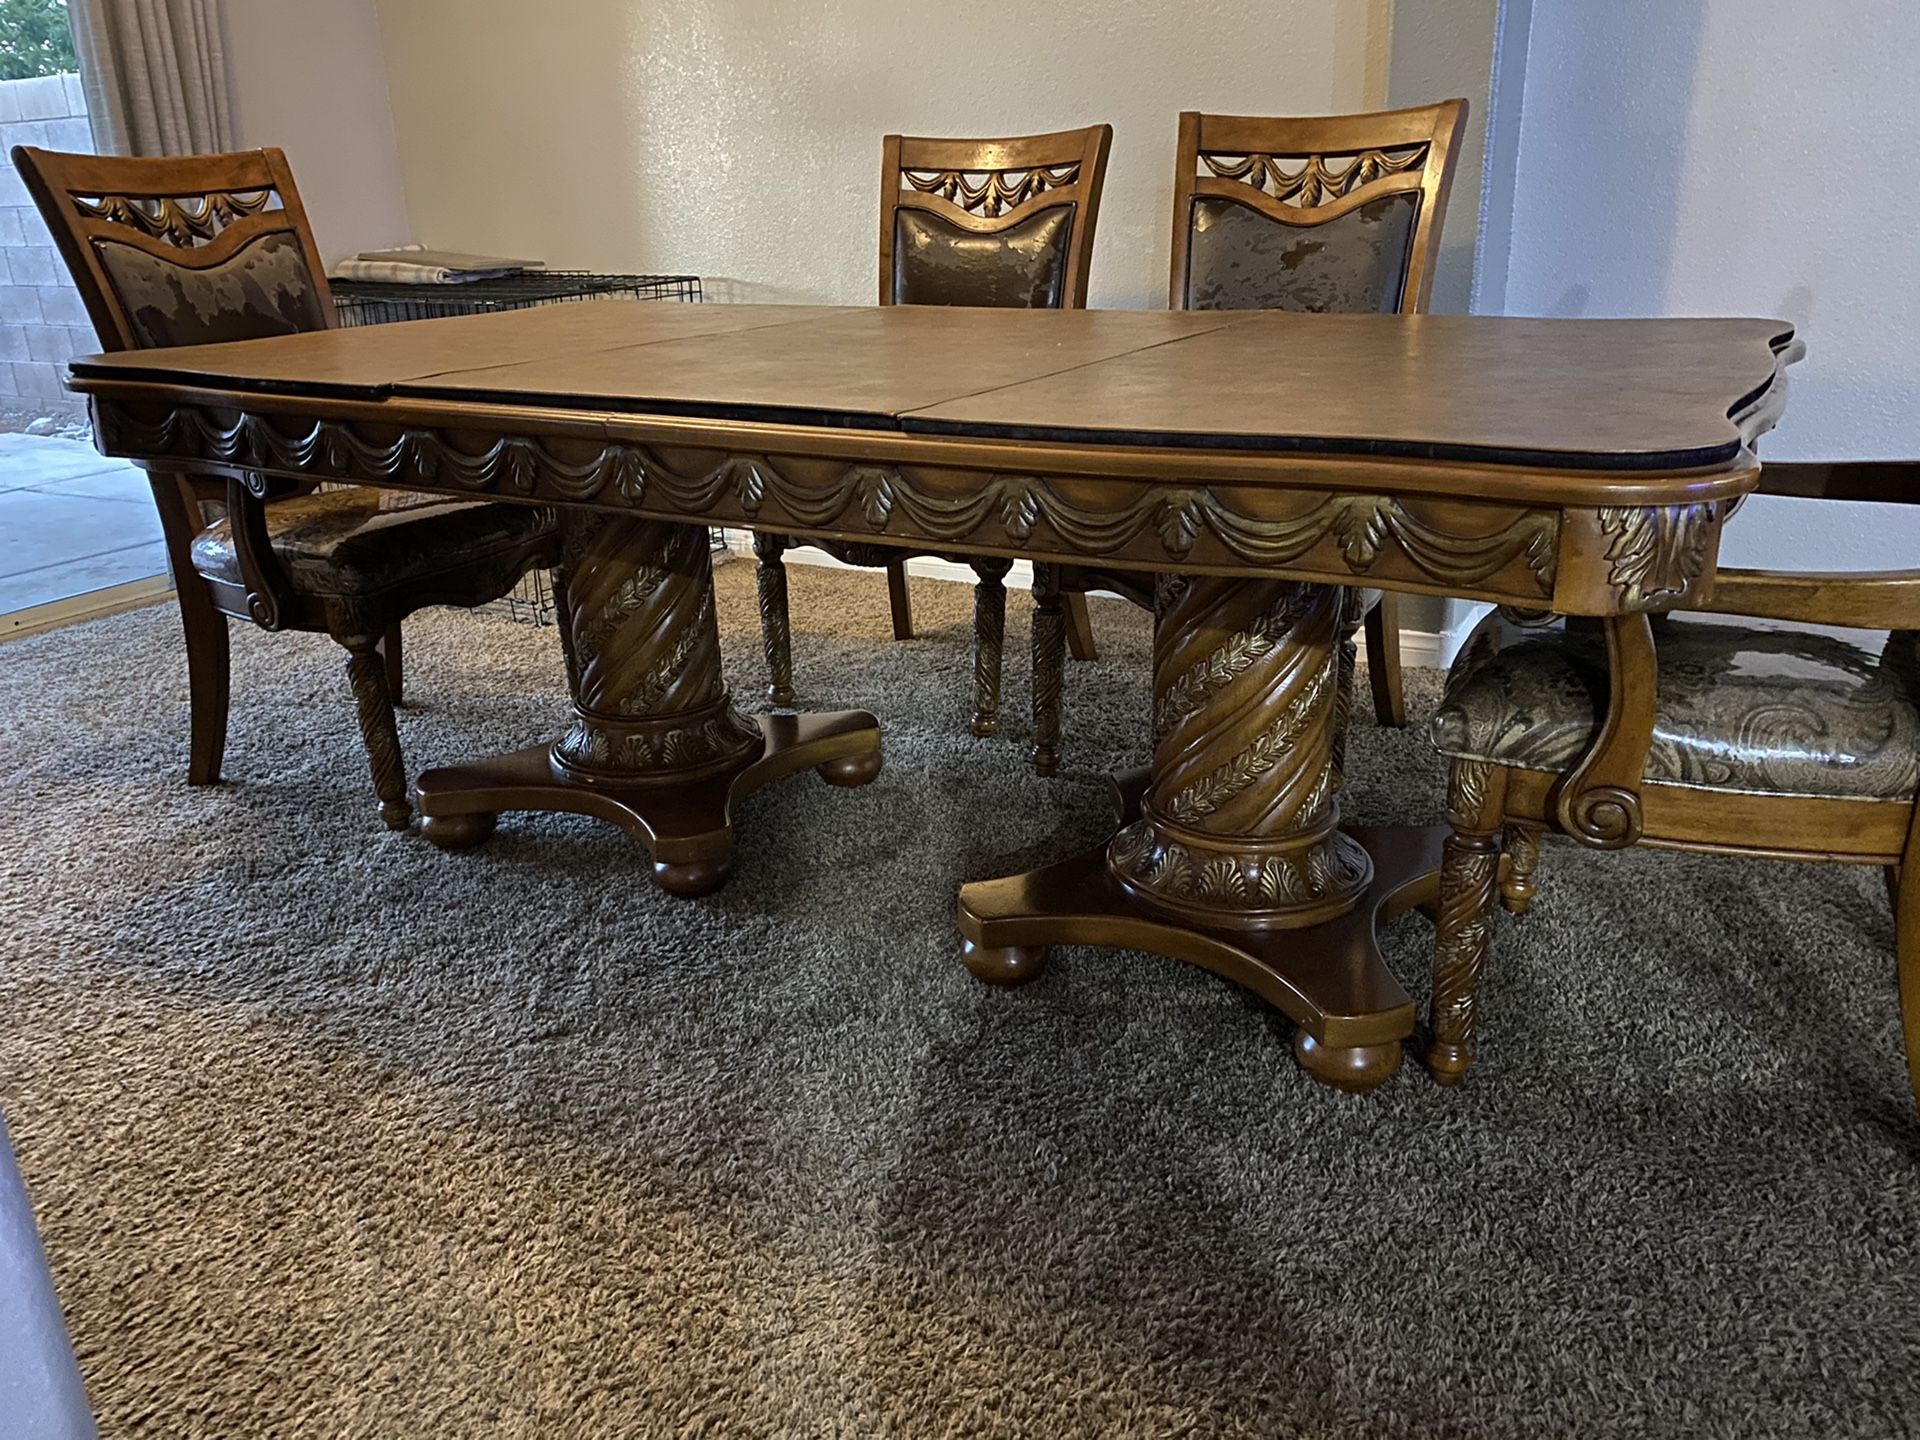 Dining room table with leaf extenders and covers *disassembled*